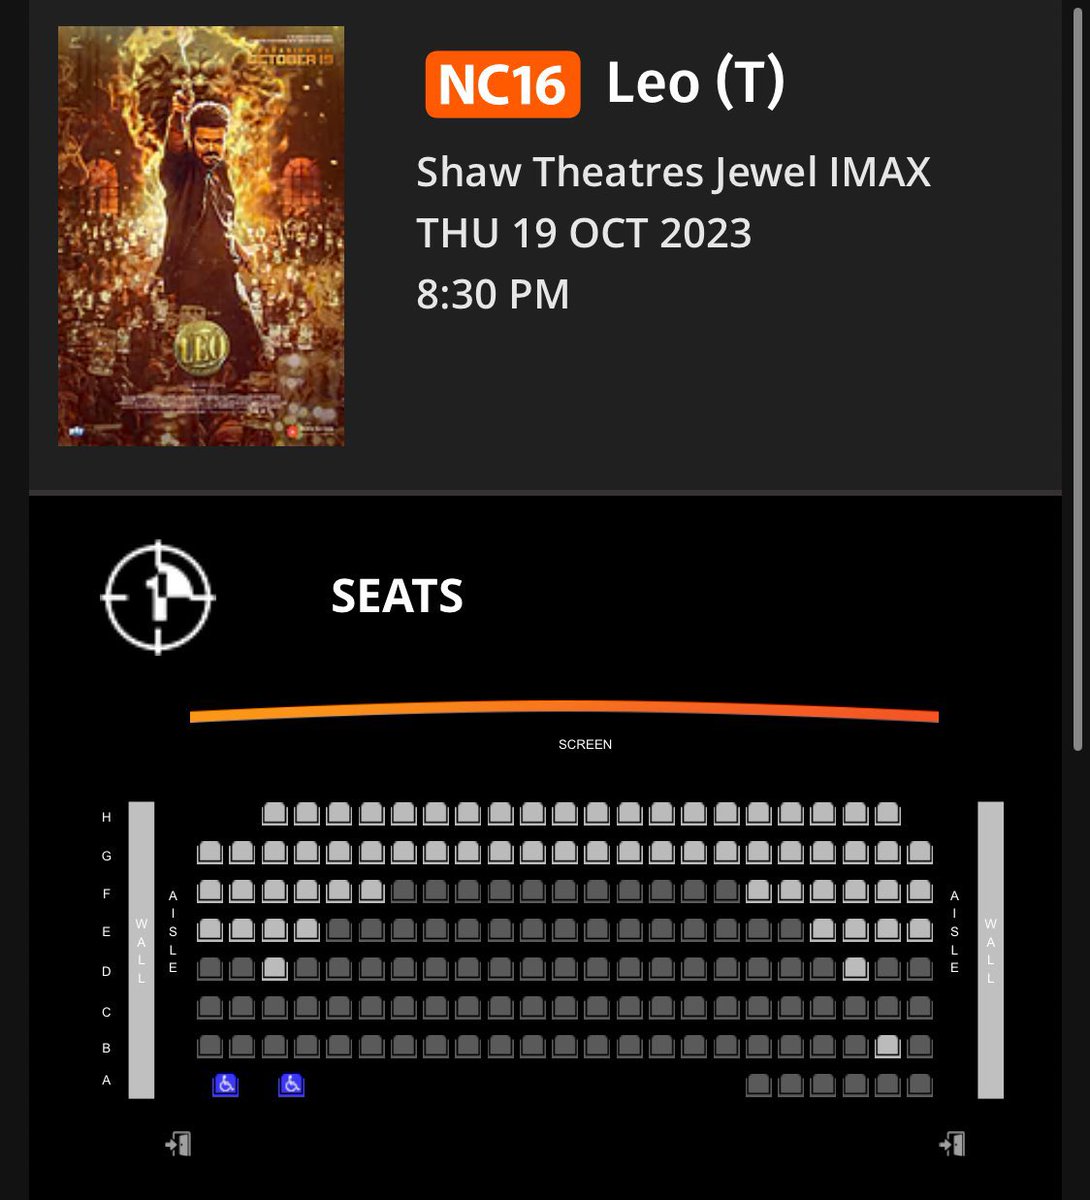 #Leo Singapore 🇸🇬 

IMAX Booking Status🔥🔥All 4 IMAX Locations are almost full now 🔥🔥

Rampage bookings 💥💥

Record Day 1  Loading 🔥🔥

#LeoAdvanceBooking #LeoTrailer @actorvijay #LeoThirdSingle #AnbenumAayudham